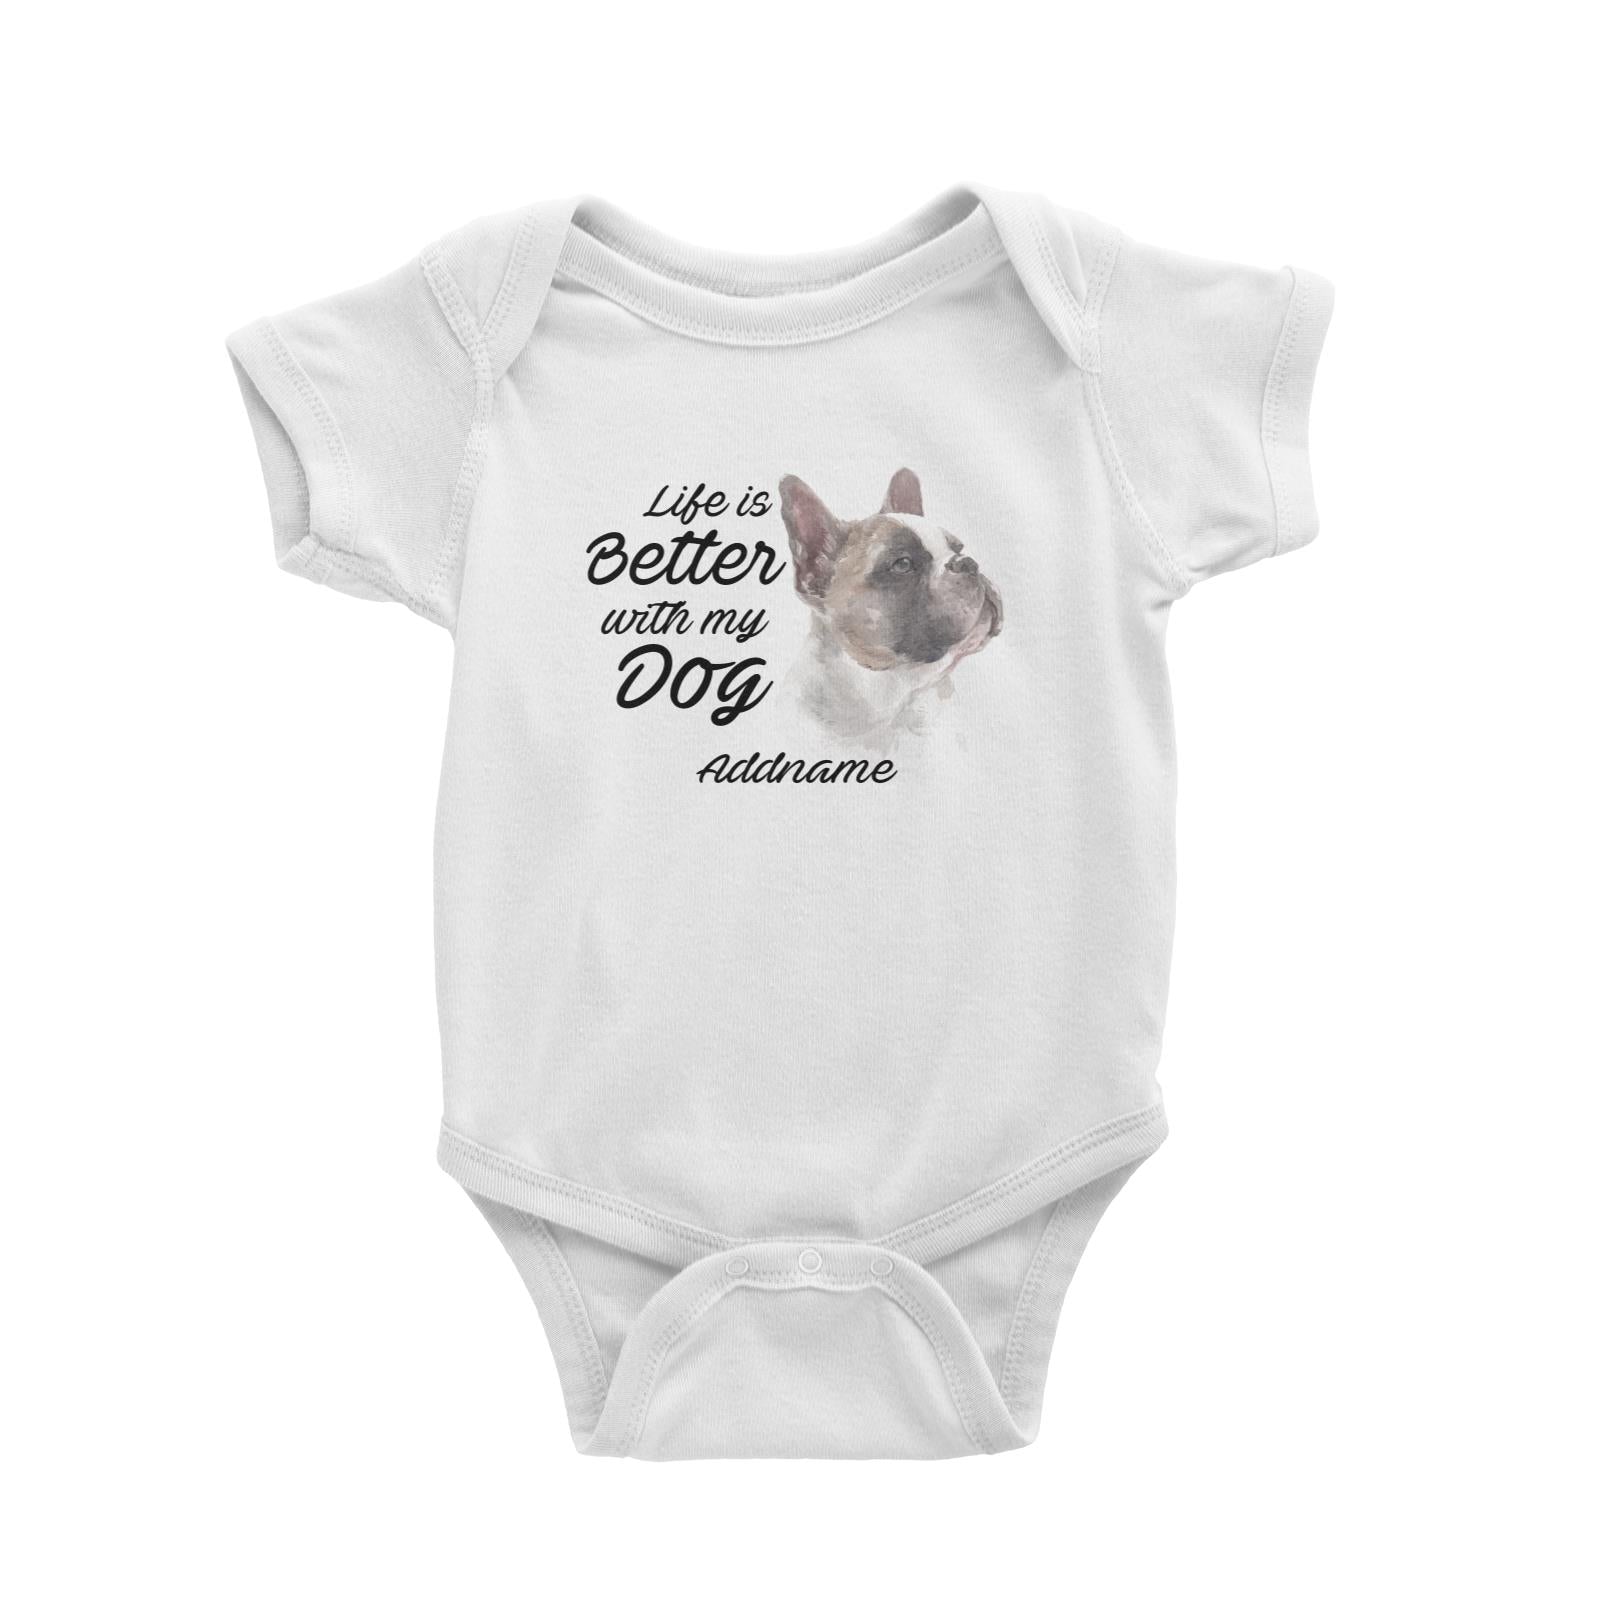 Watercolor Life is Better With My Dog French BulldogAddname Baby Romper